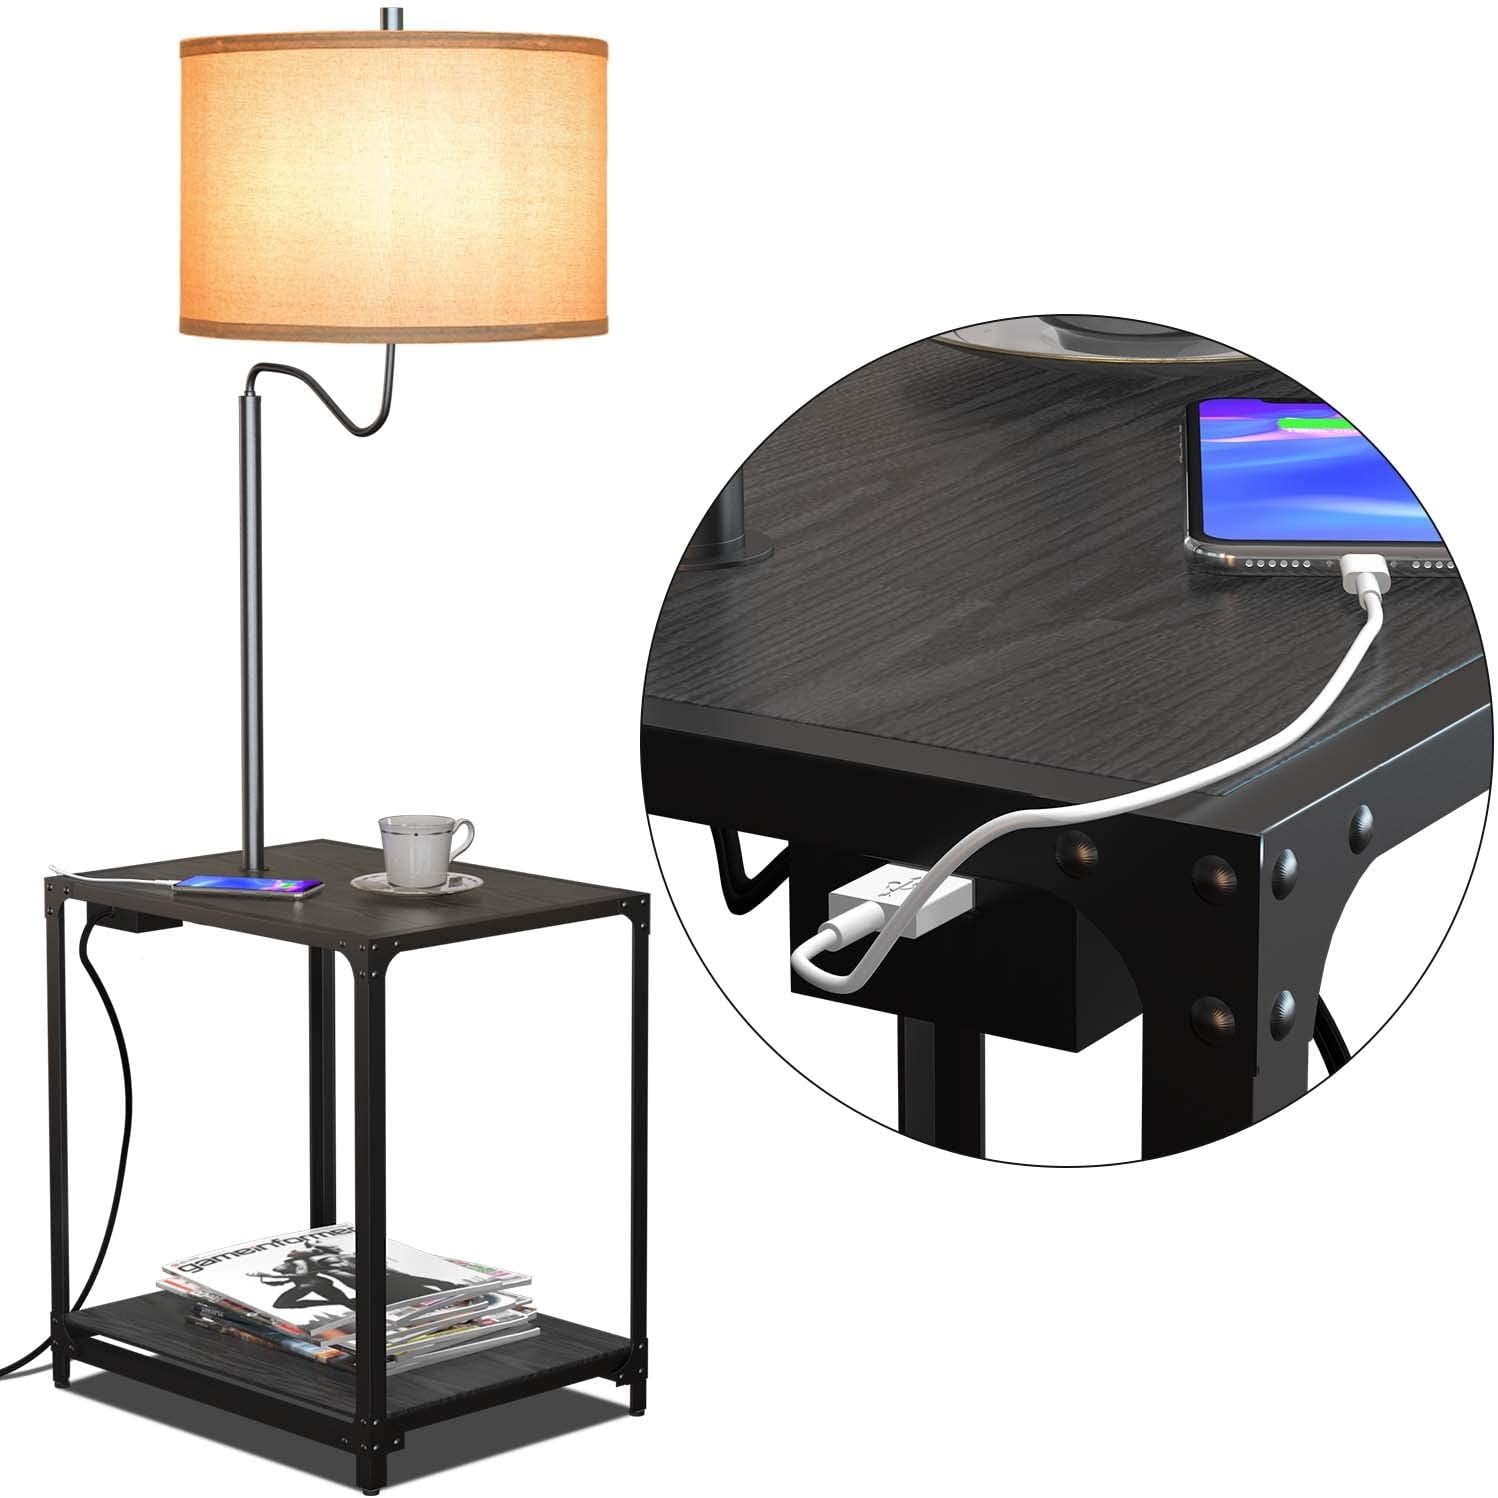 Led Floor Lamp With End Table And Usb, End Table Floor Lamp With Usb Port